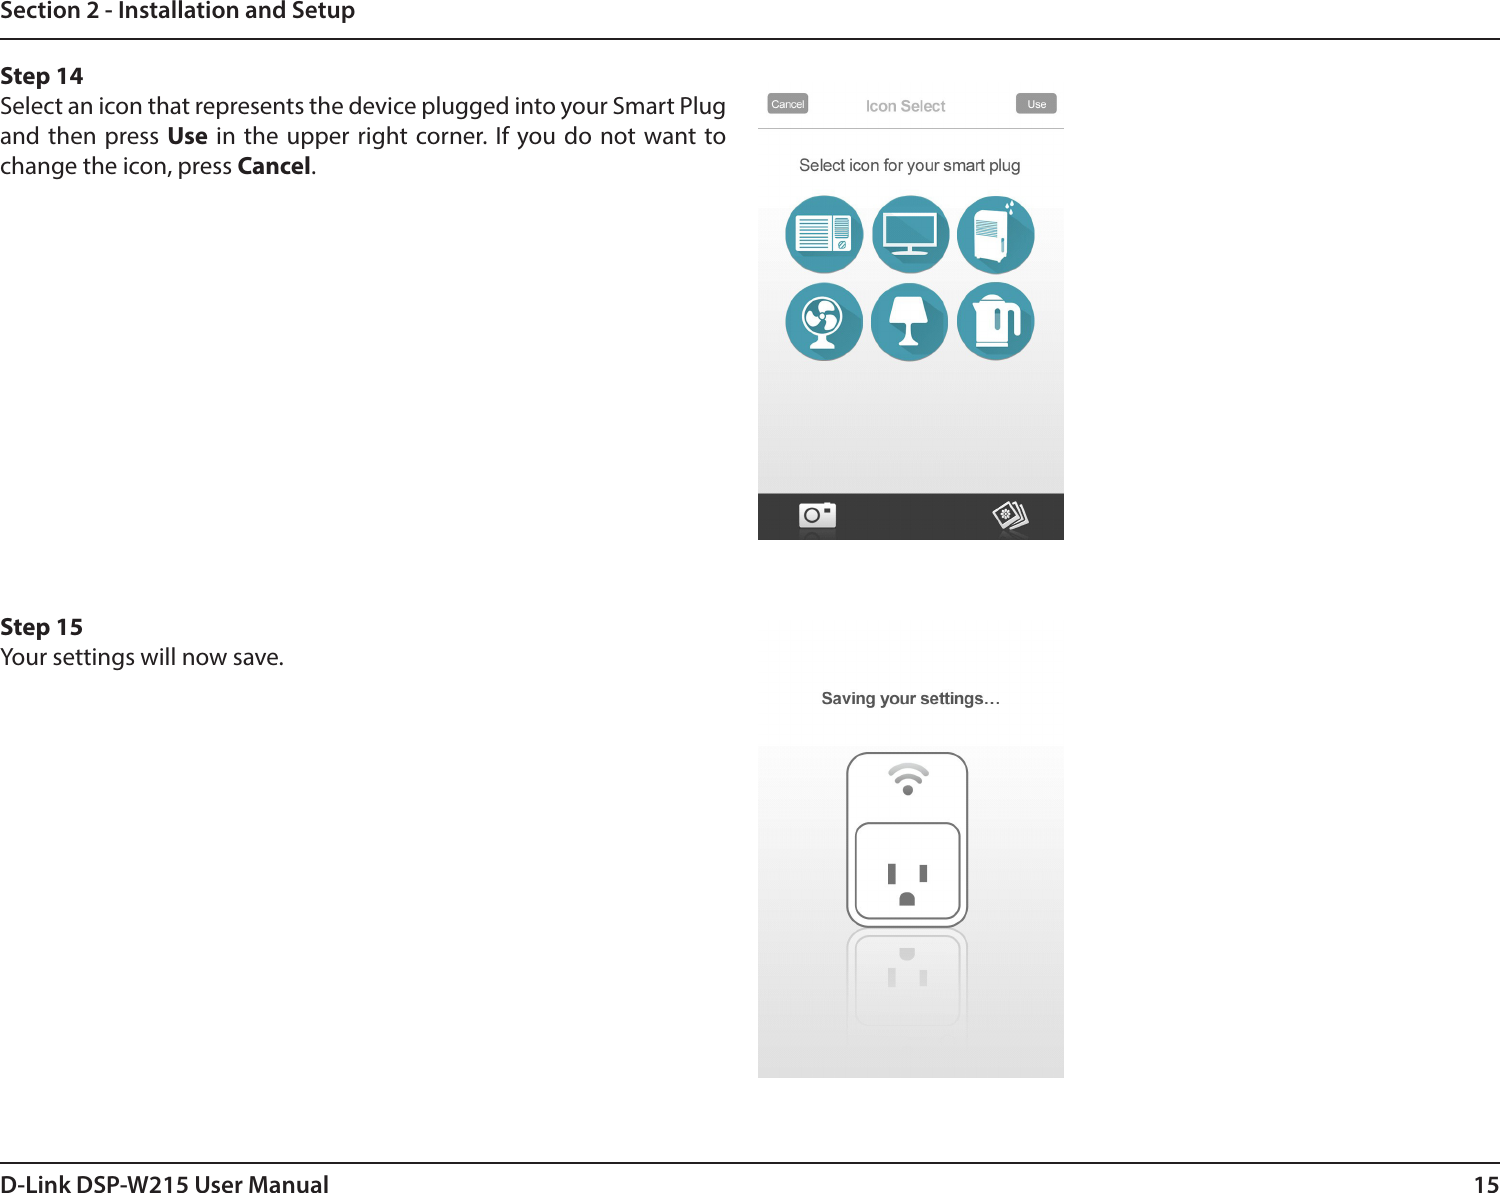 15D-Link DSP-W215 User ManualSection 2 - Installation and SetupStep 14Select an icon that represents the device plugged into your Smart Plug and then press Use in the upper right corner. If you do not want to change the icon, press Cancel. Step 15Your settings will now save.